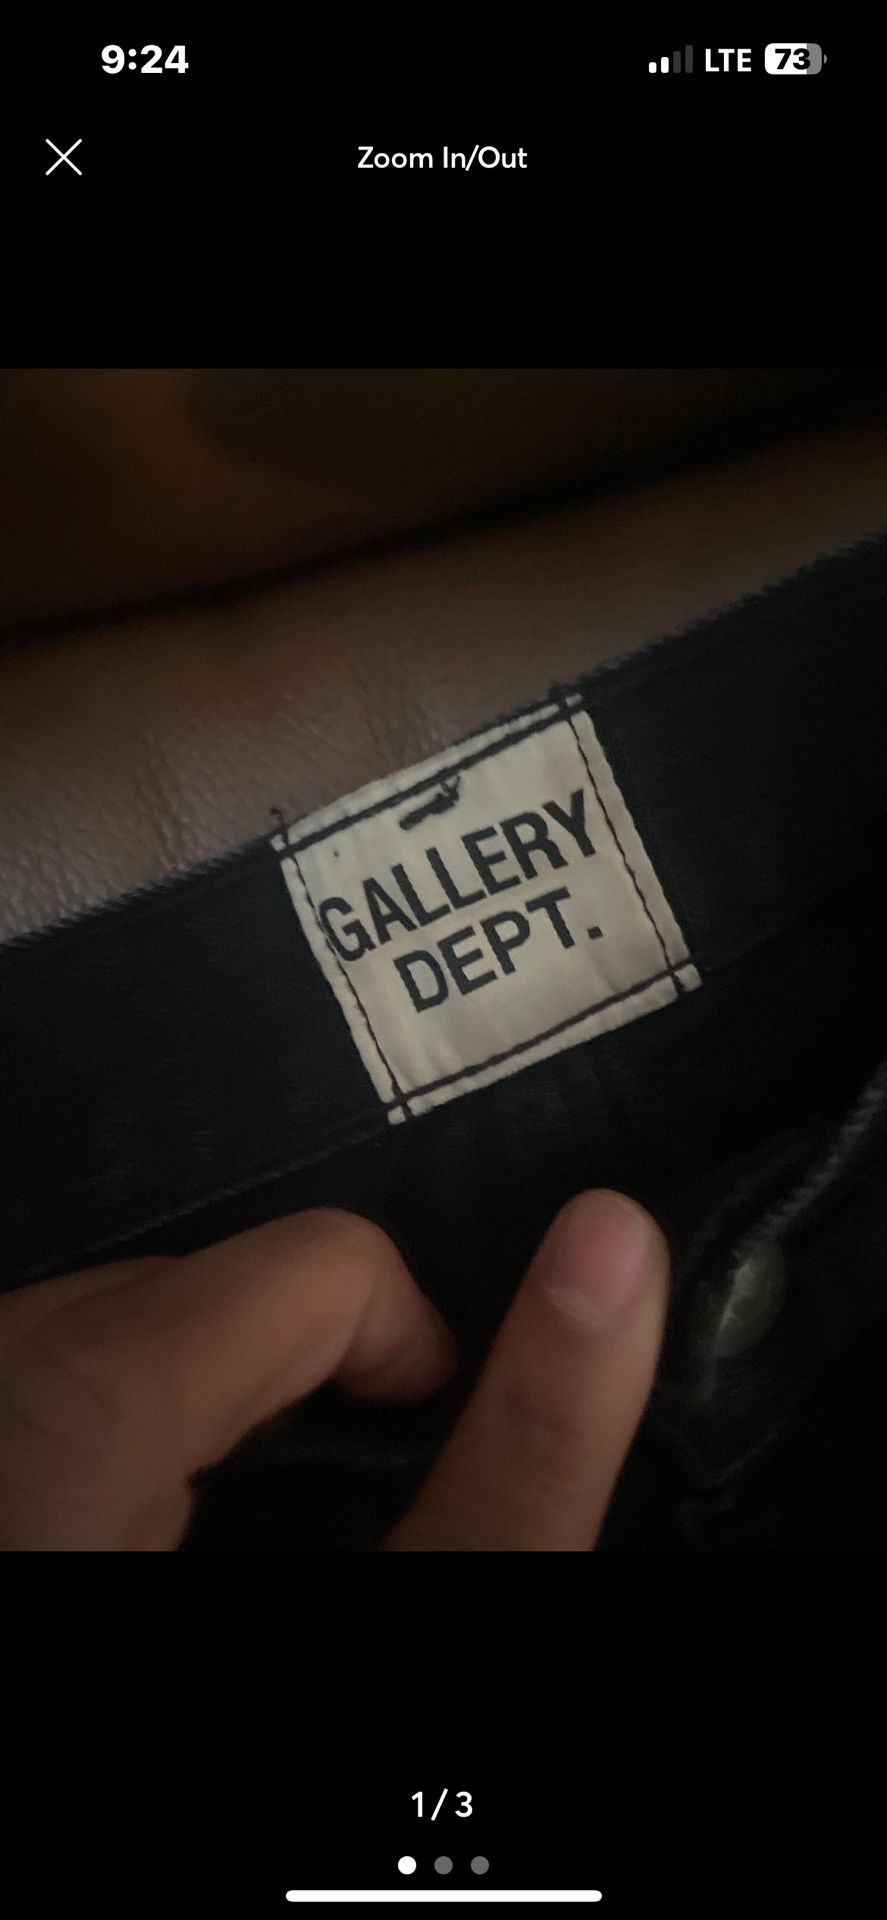 Gallery jeans 